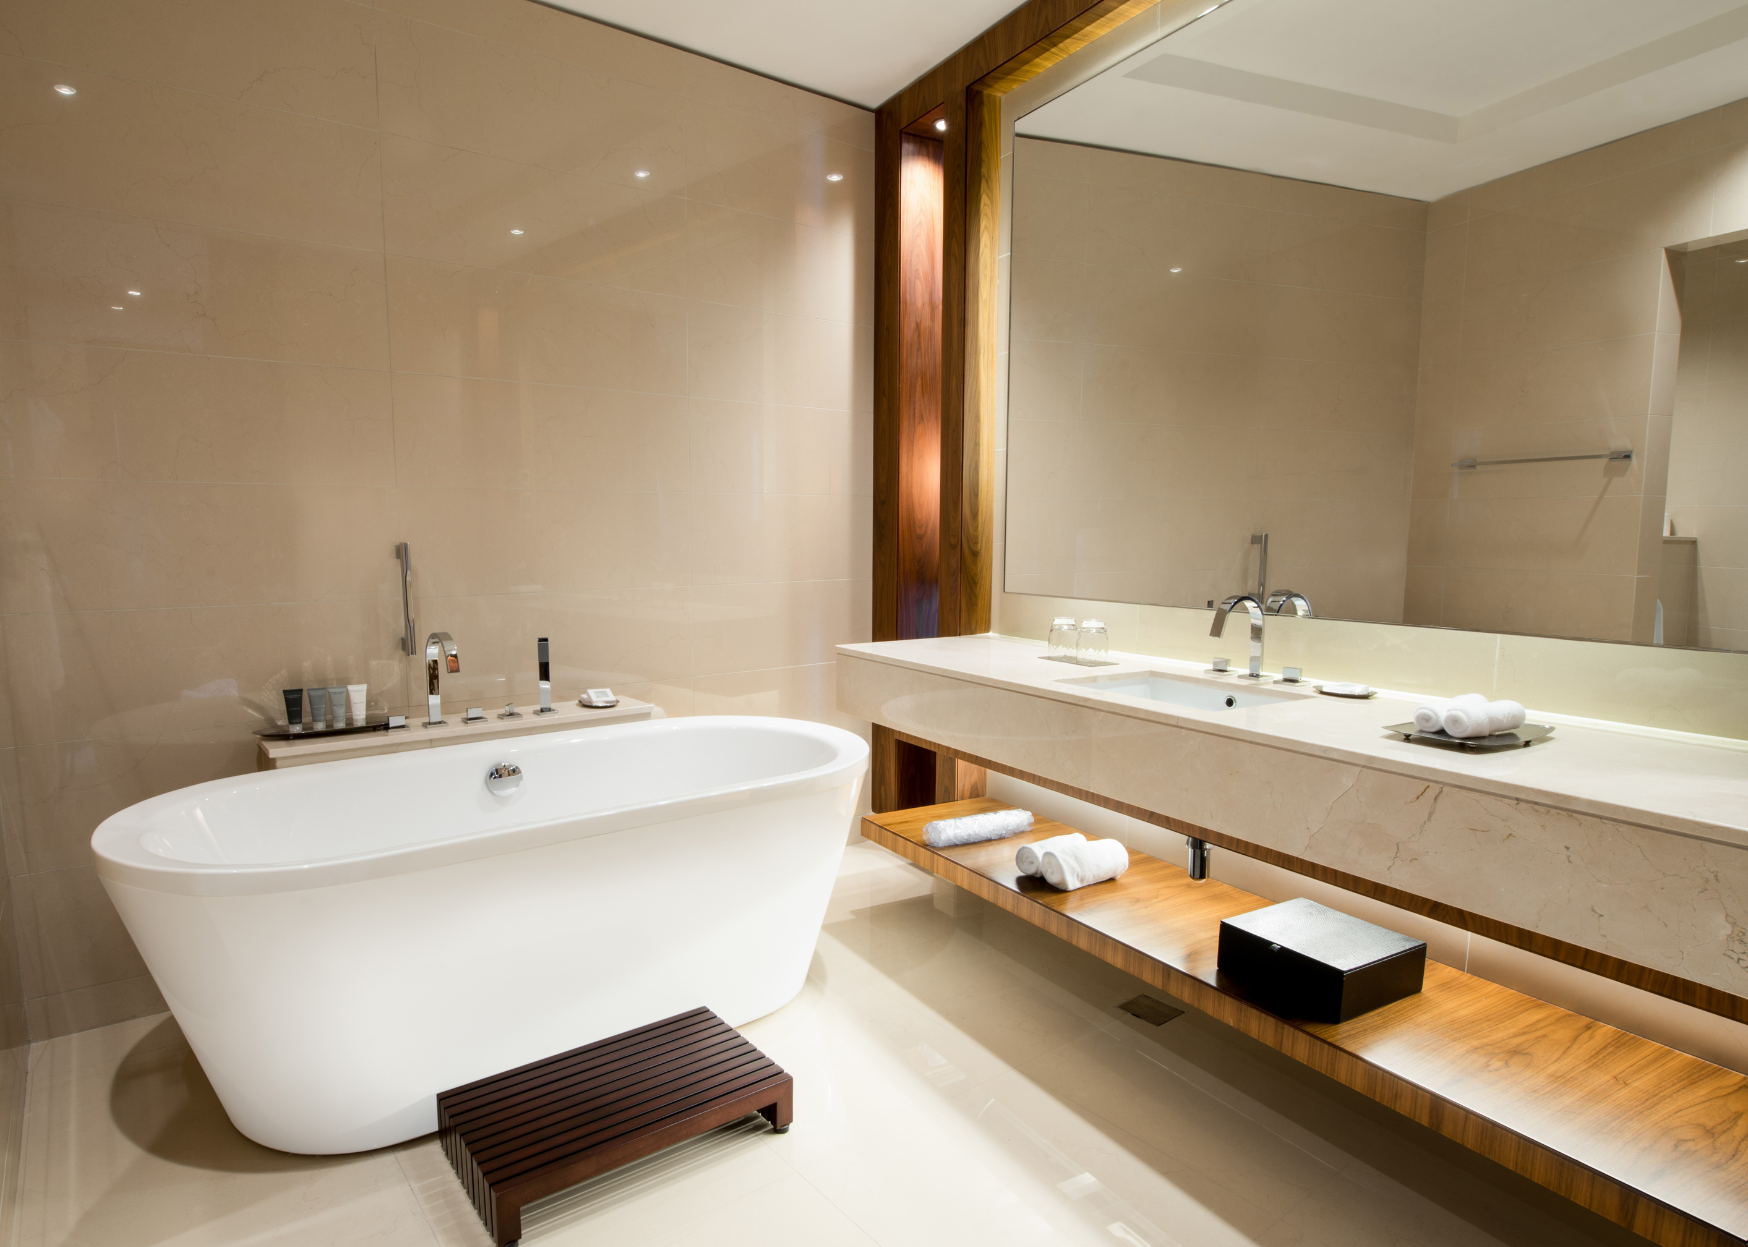 15 Tips to Make your Bathroom Look Luxurious